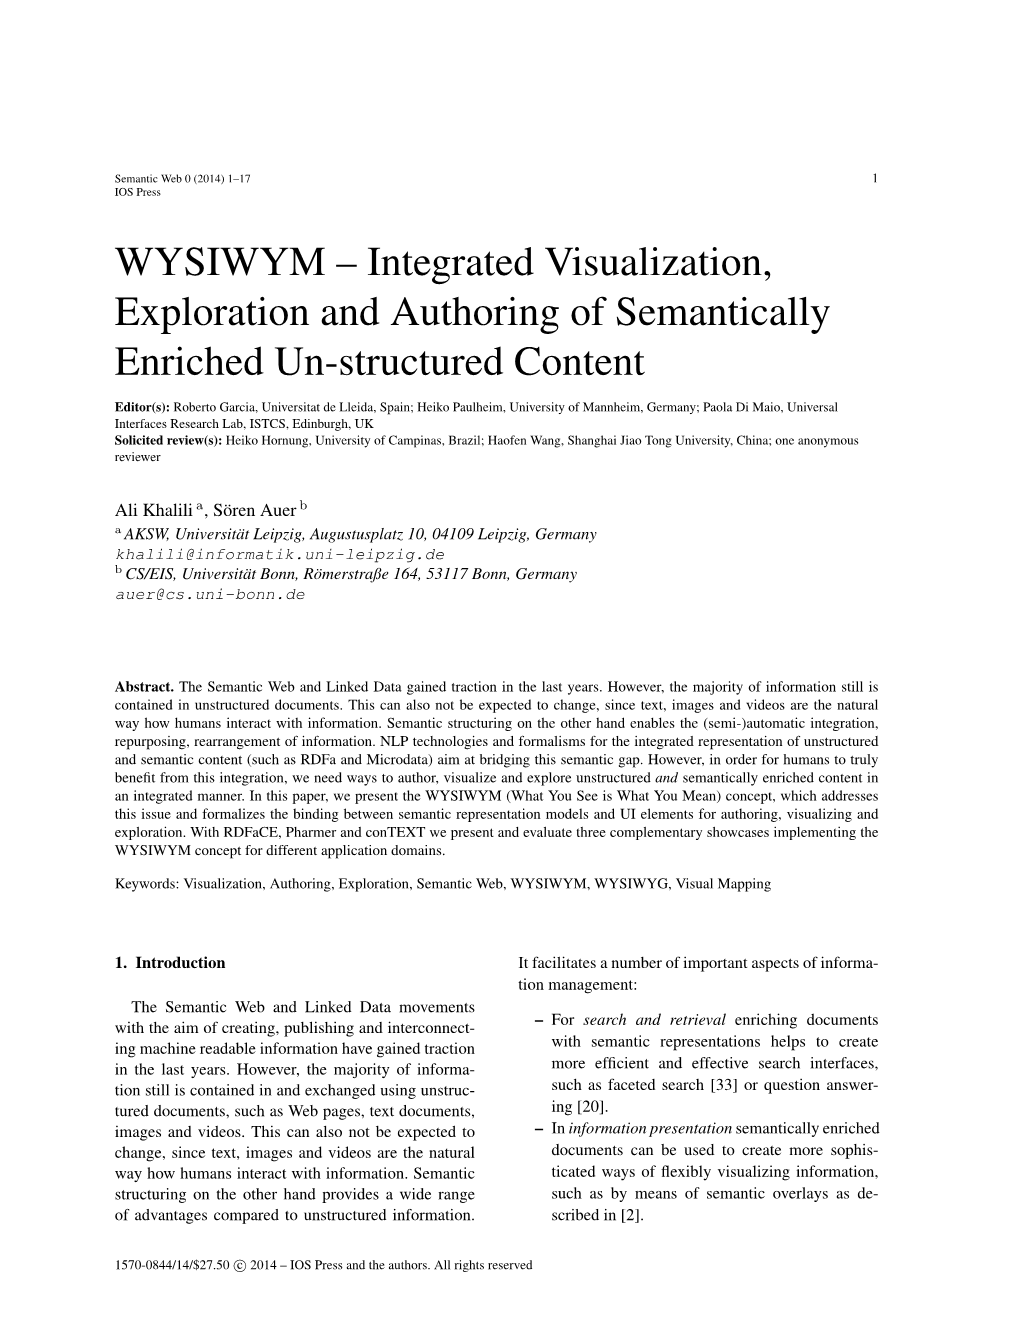 WYSIWYM – Integrated Visualization, Exploration and Authoring of Semantically Enriched Un-Structured Content